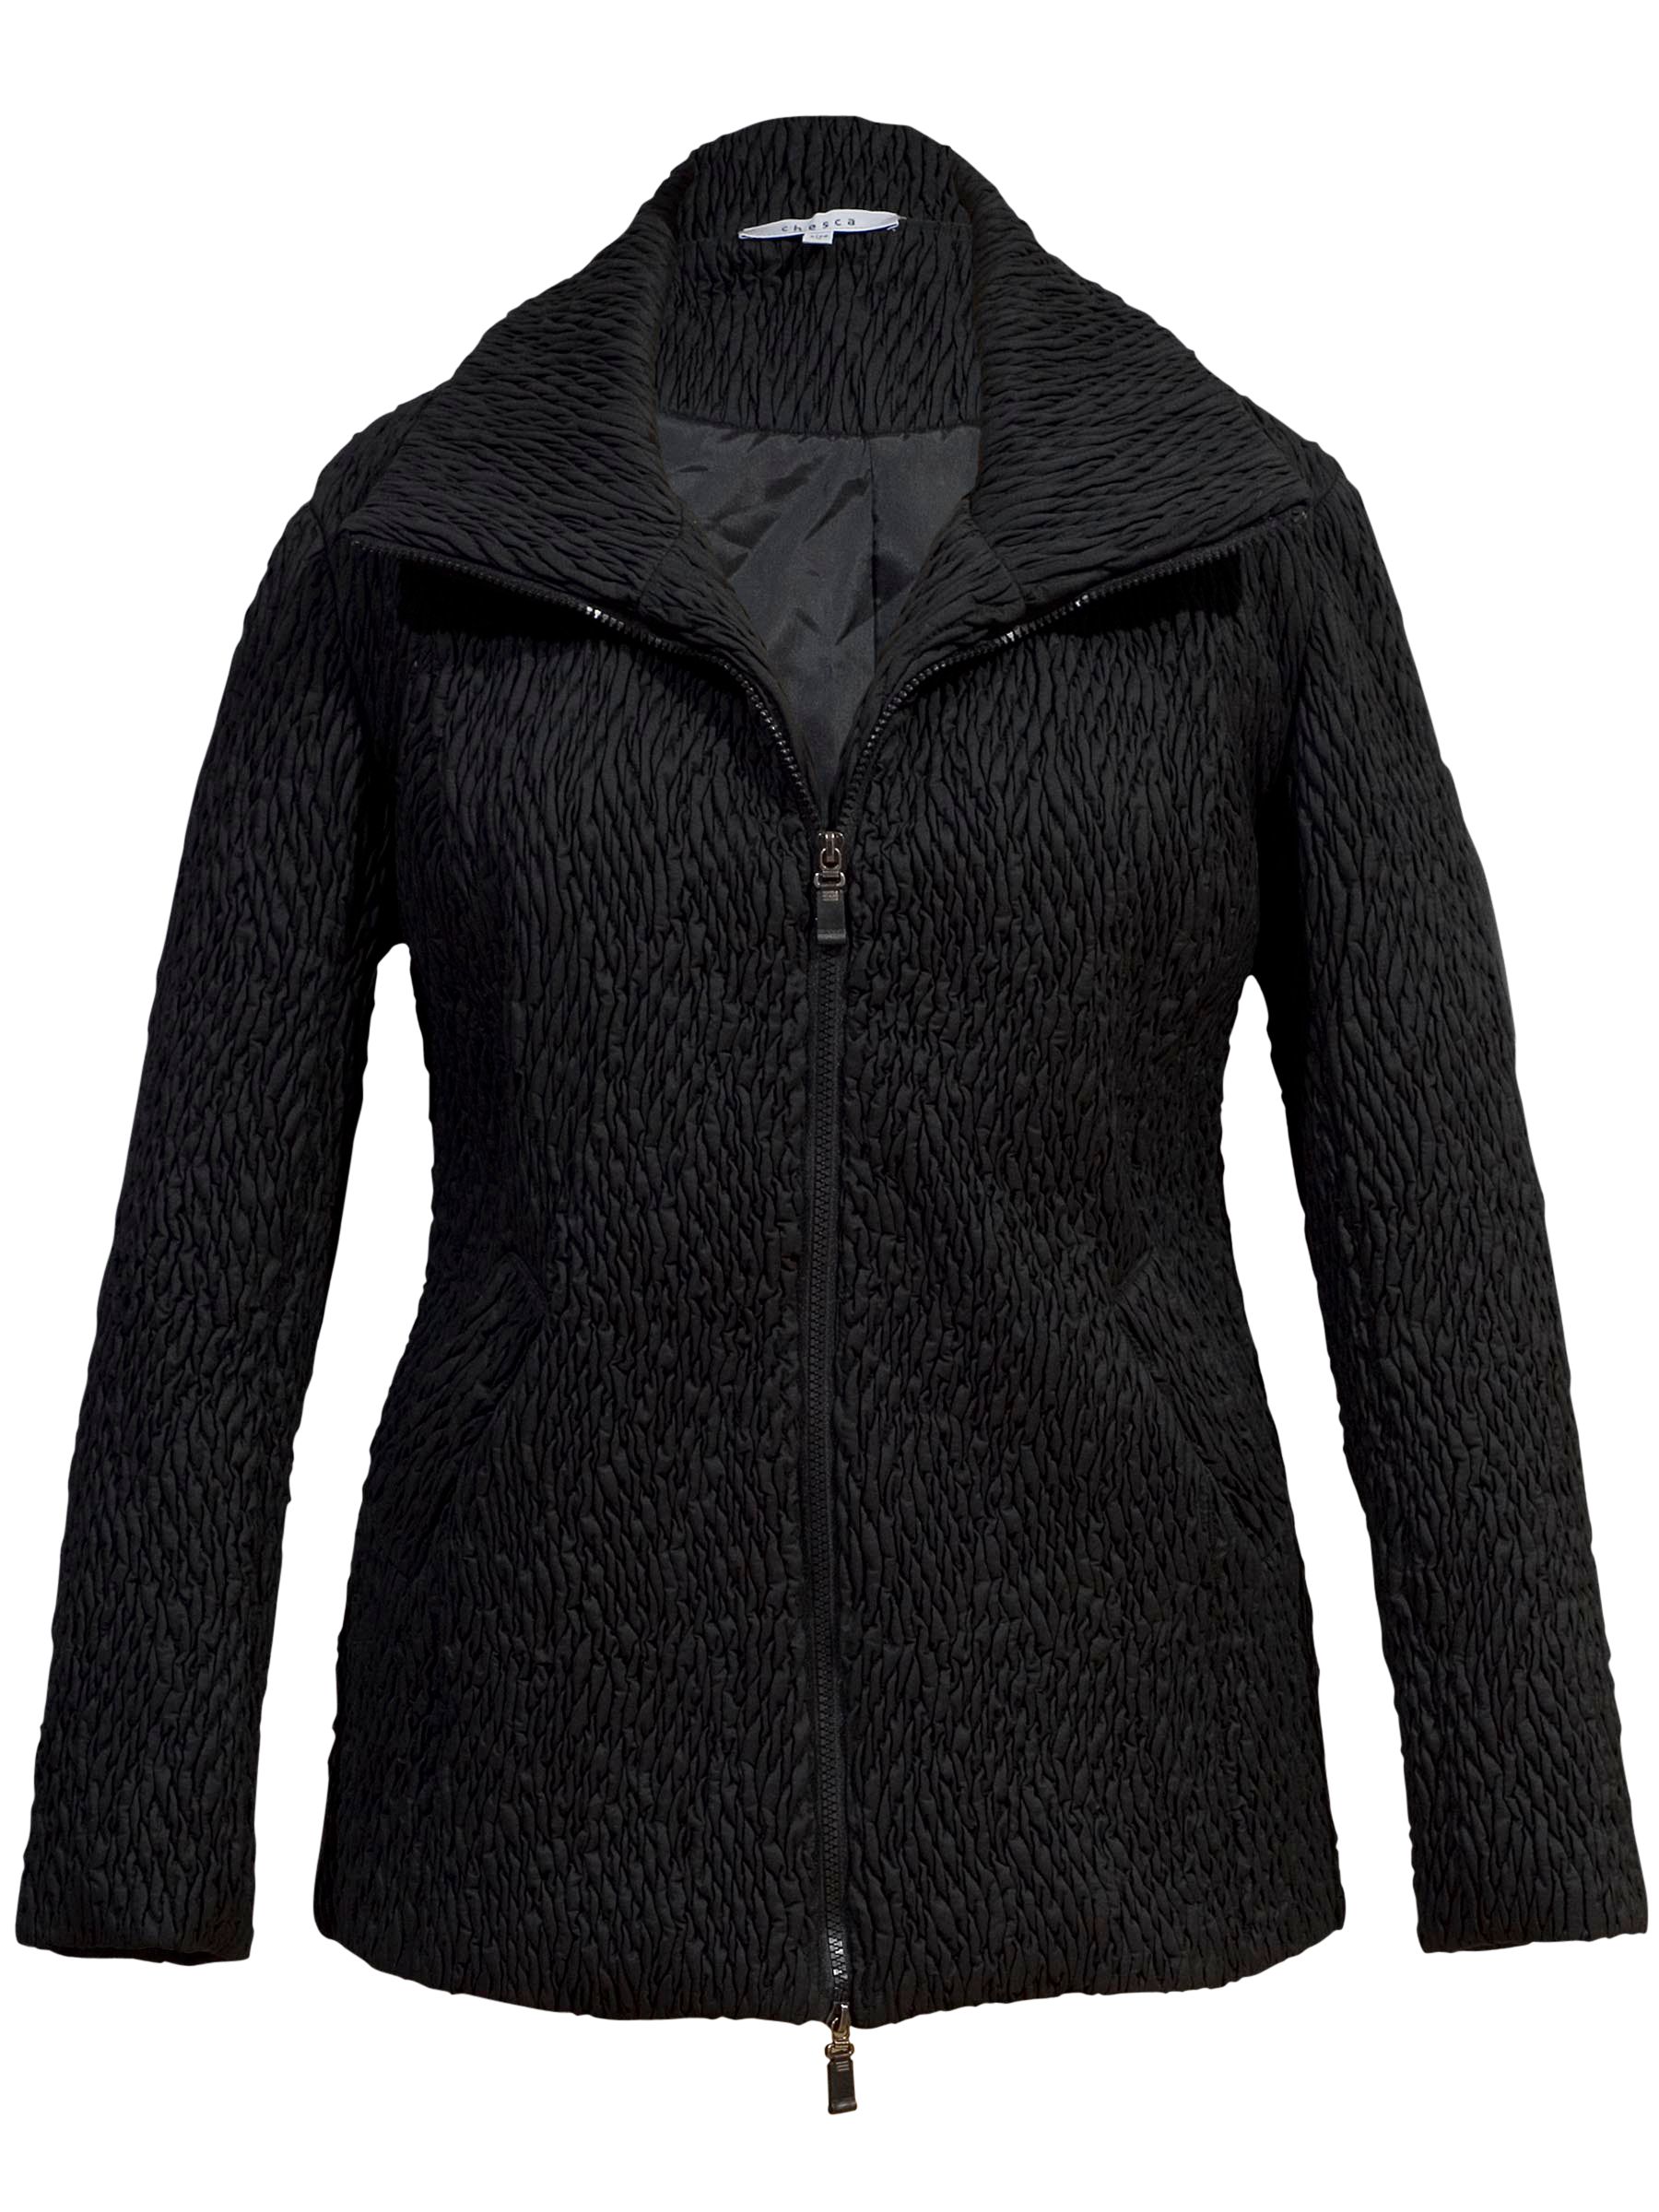 Chesca Ripple Quilted Jacket, Black at John Lewis